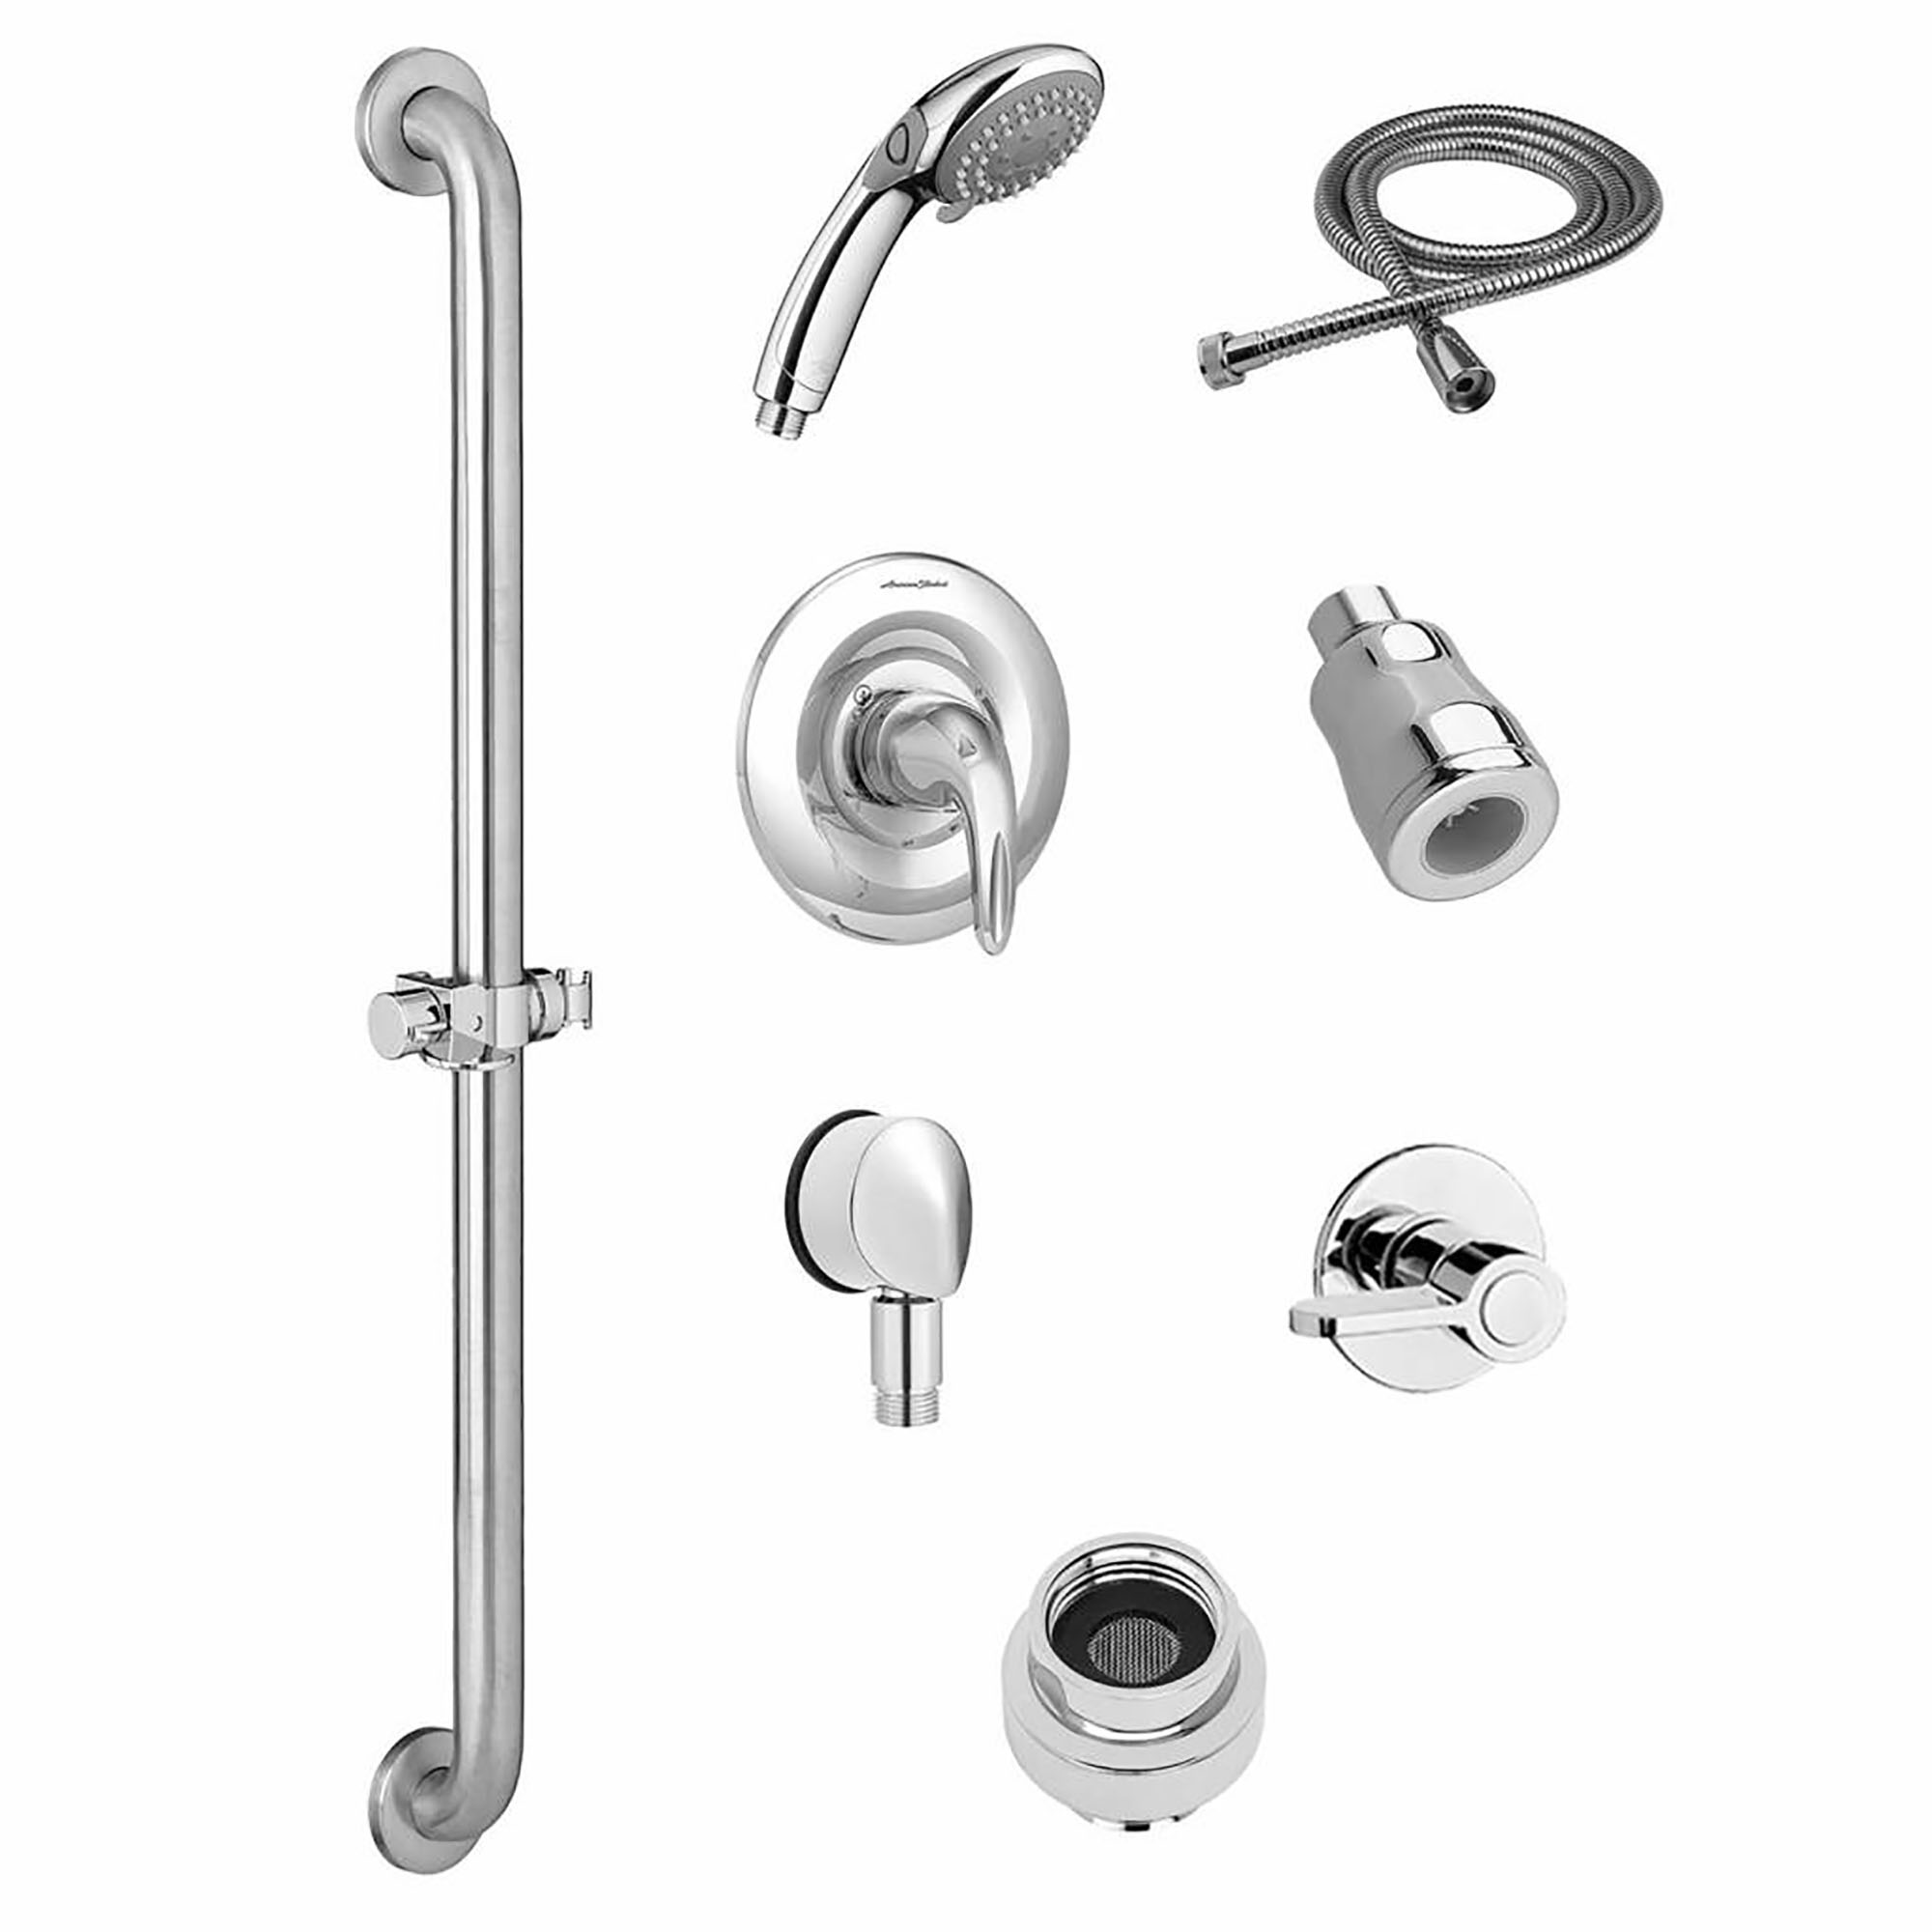 Commercial Shower System Trim Kit 1.5 gpm/5.7 Lpm with 36-Inch Slide-Grab Bar, Hand Shower and Showerhead